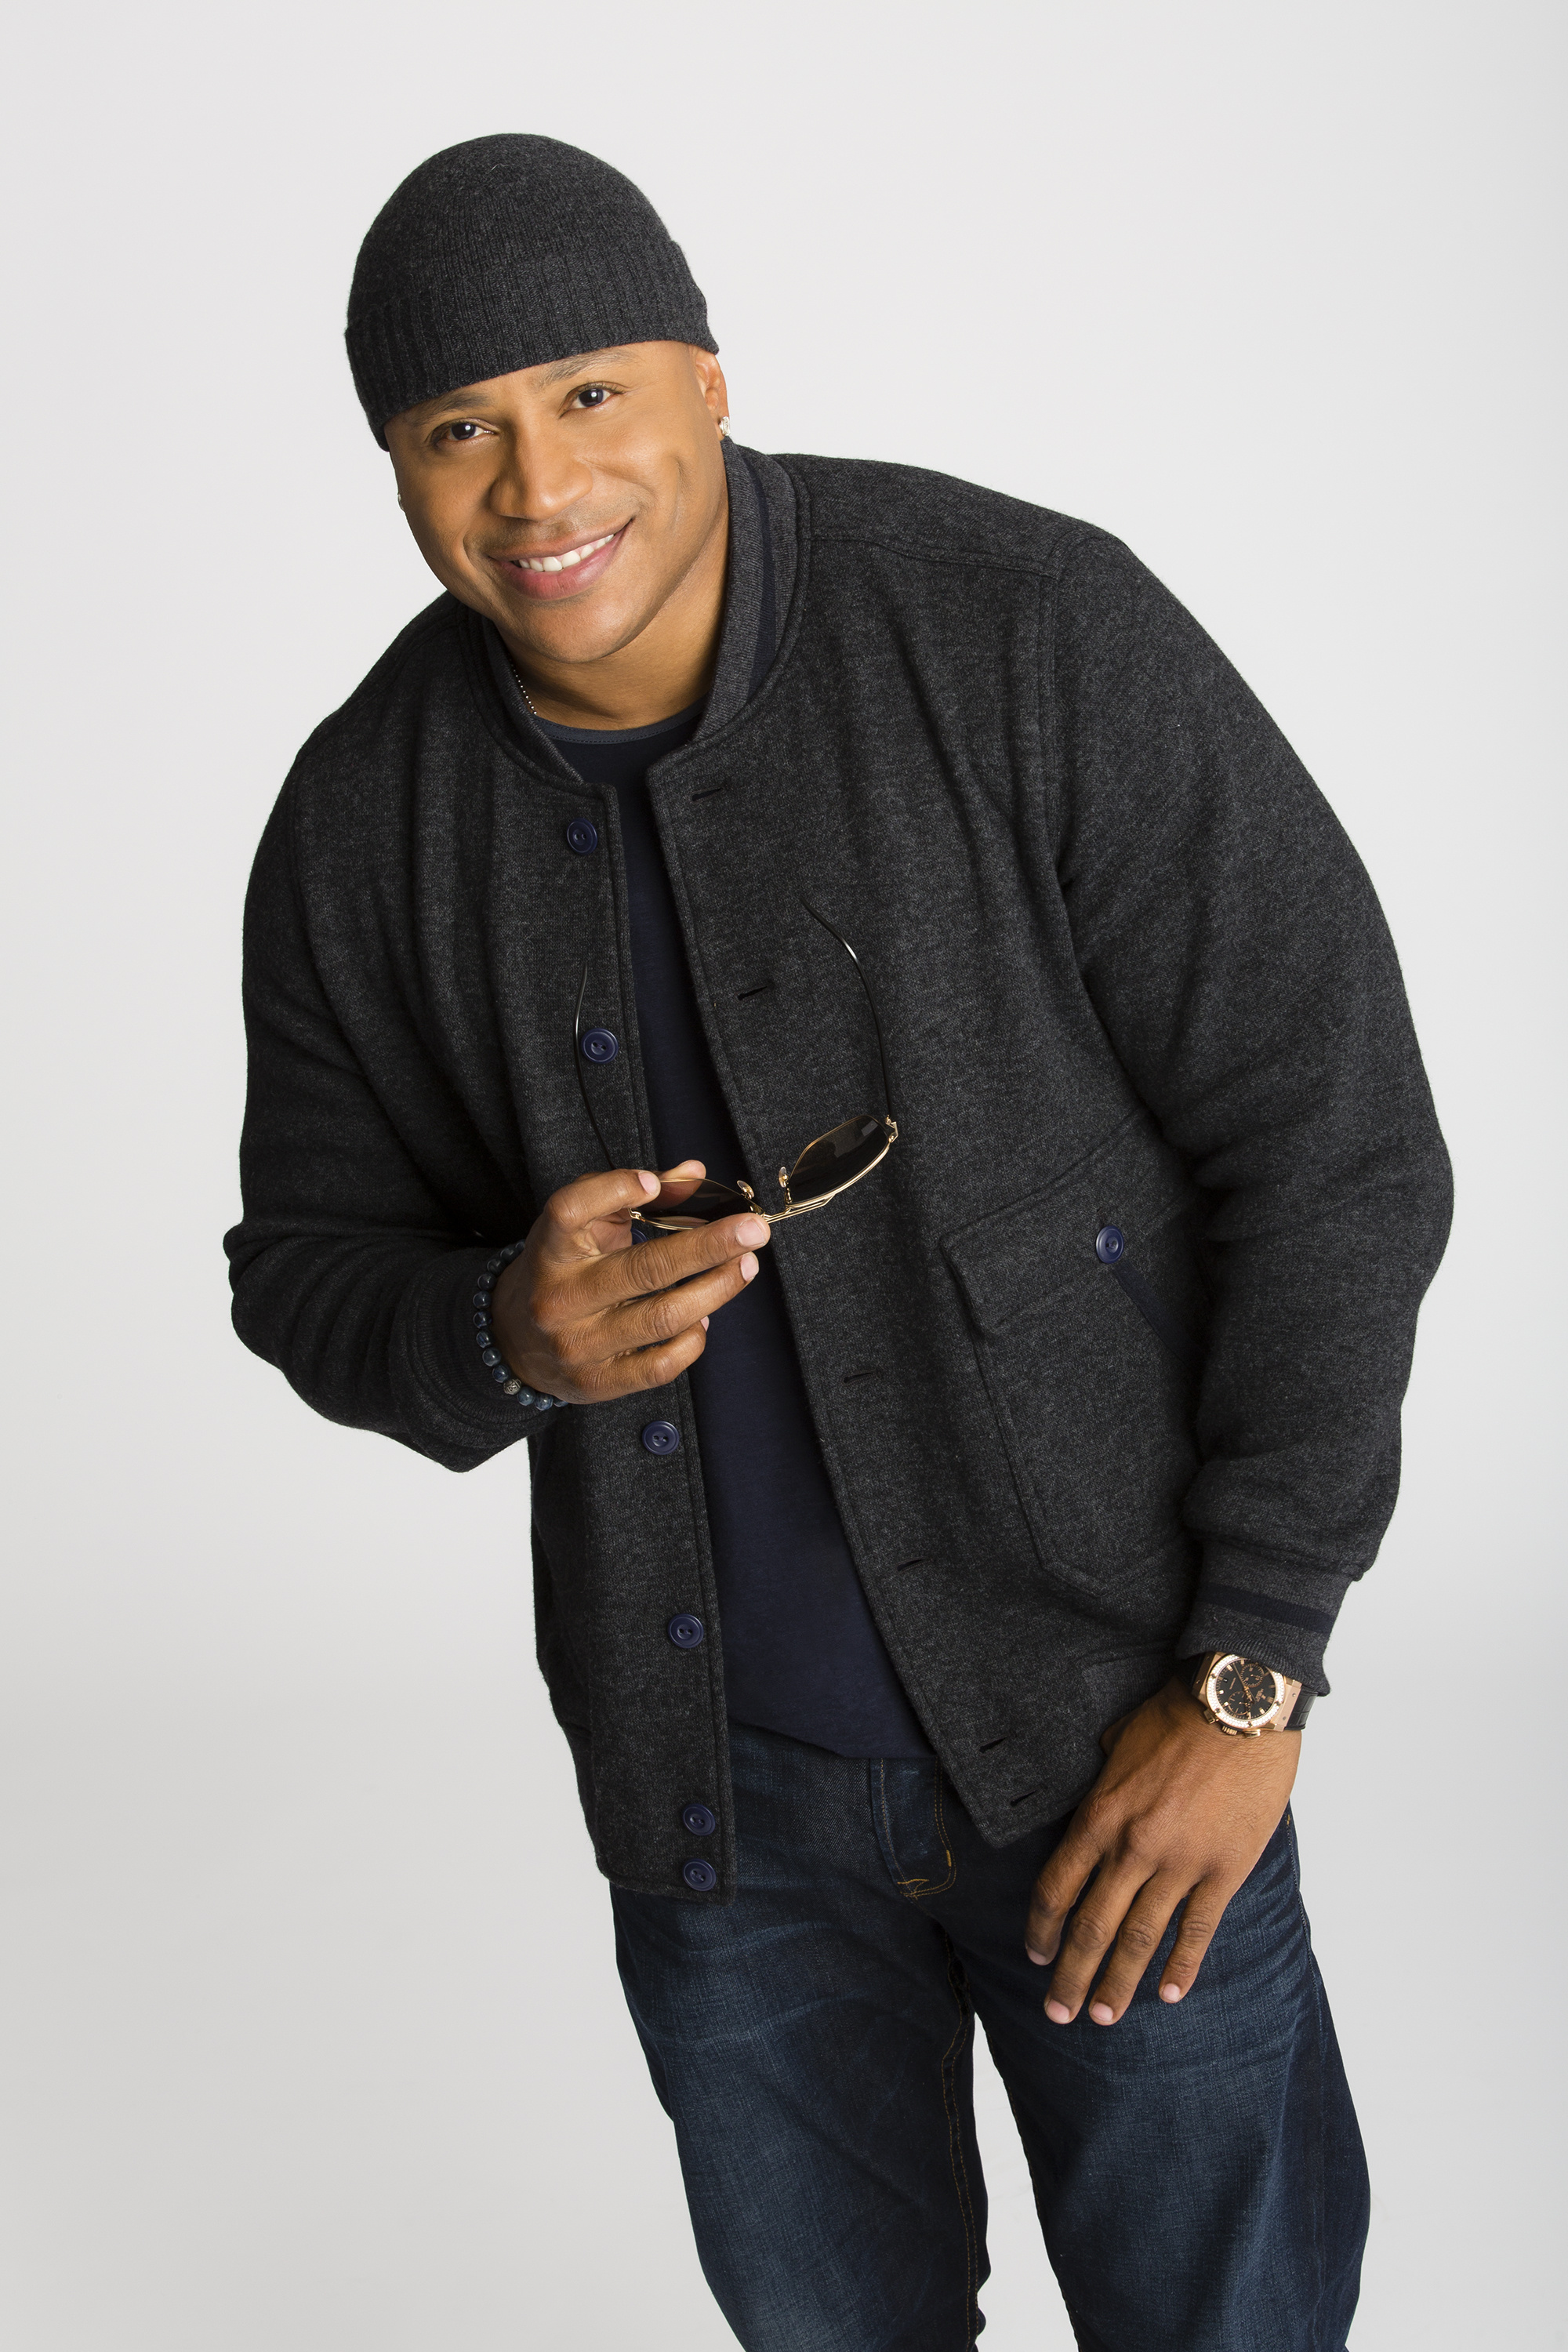 LL Cool J wallpapers, Music-themed, High-quality images, Celebrity photography, 2000x3000 HD Handy